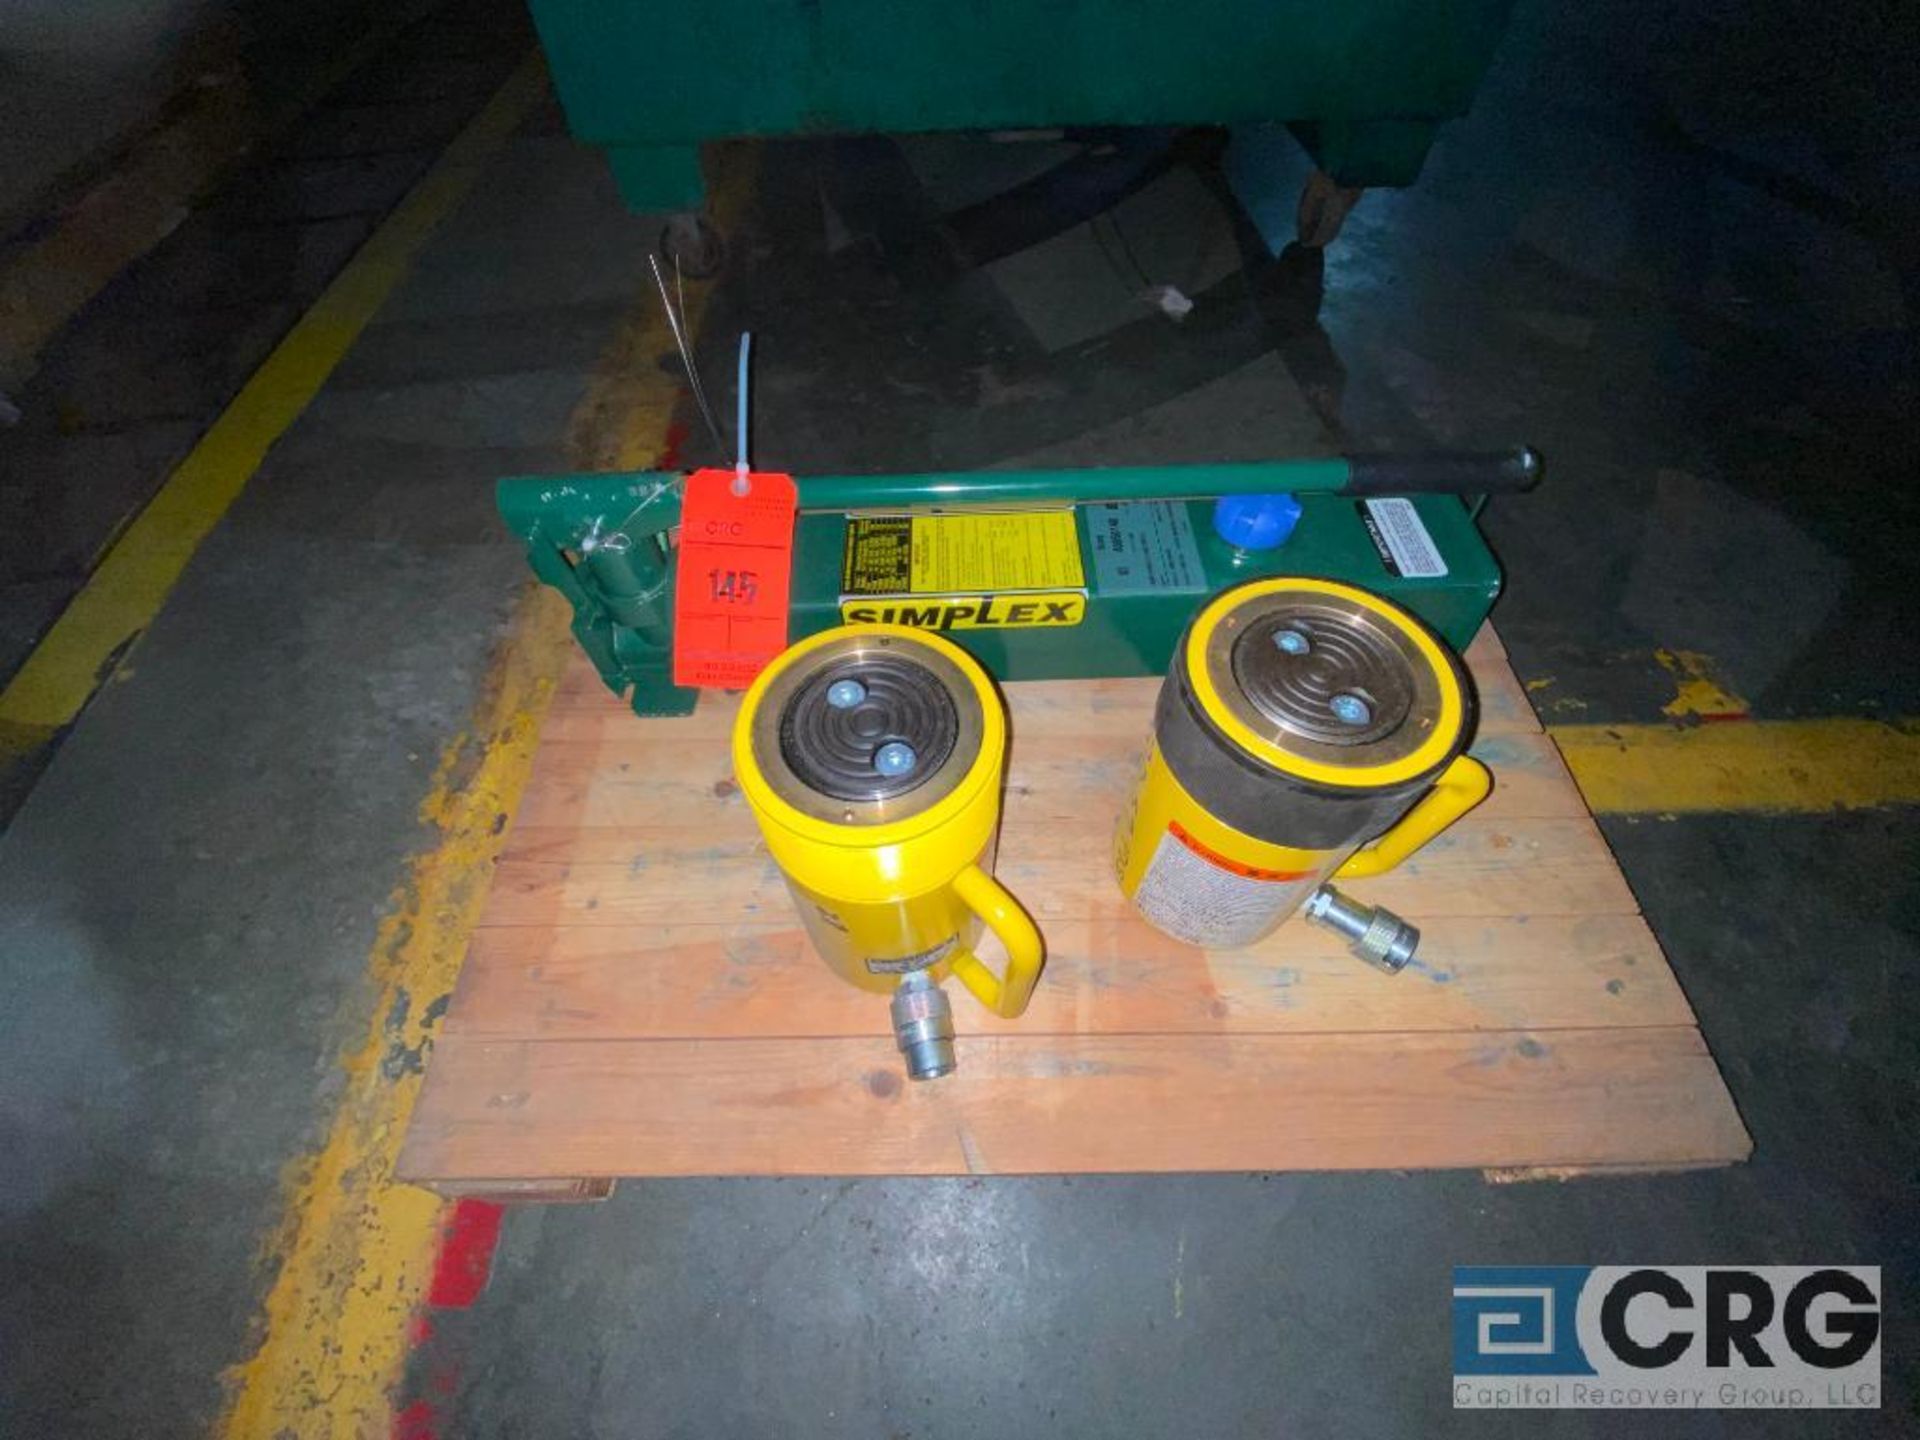 Simplex hydraulic pump, with (2) enerpac 50 ton jacks (Location: Finished Warehouse)